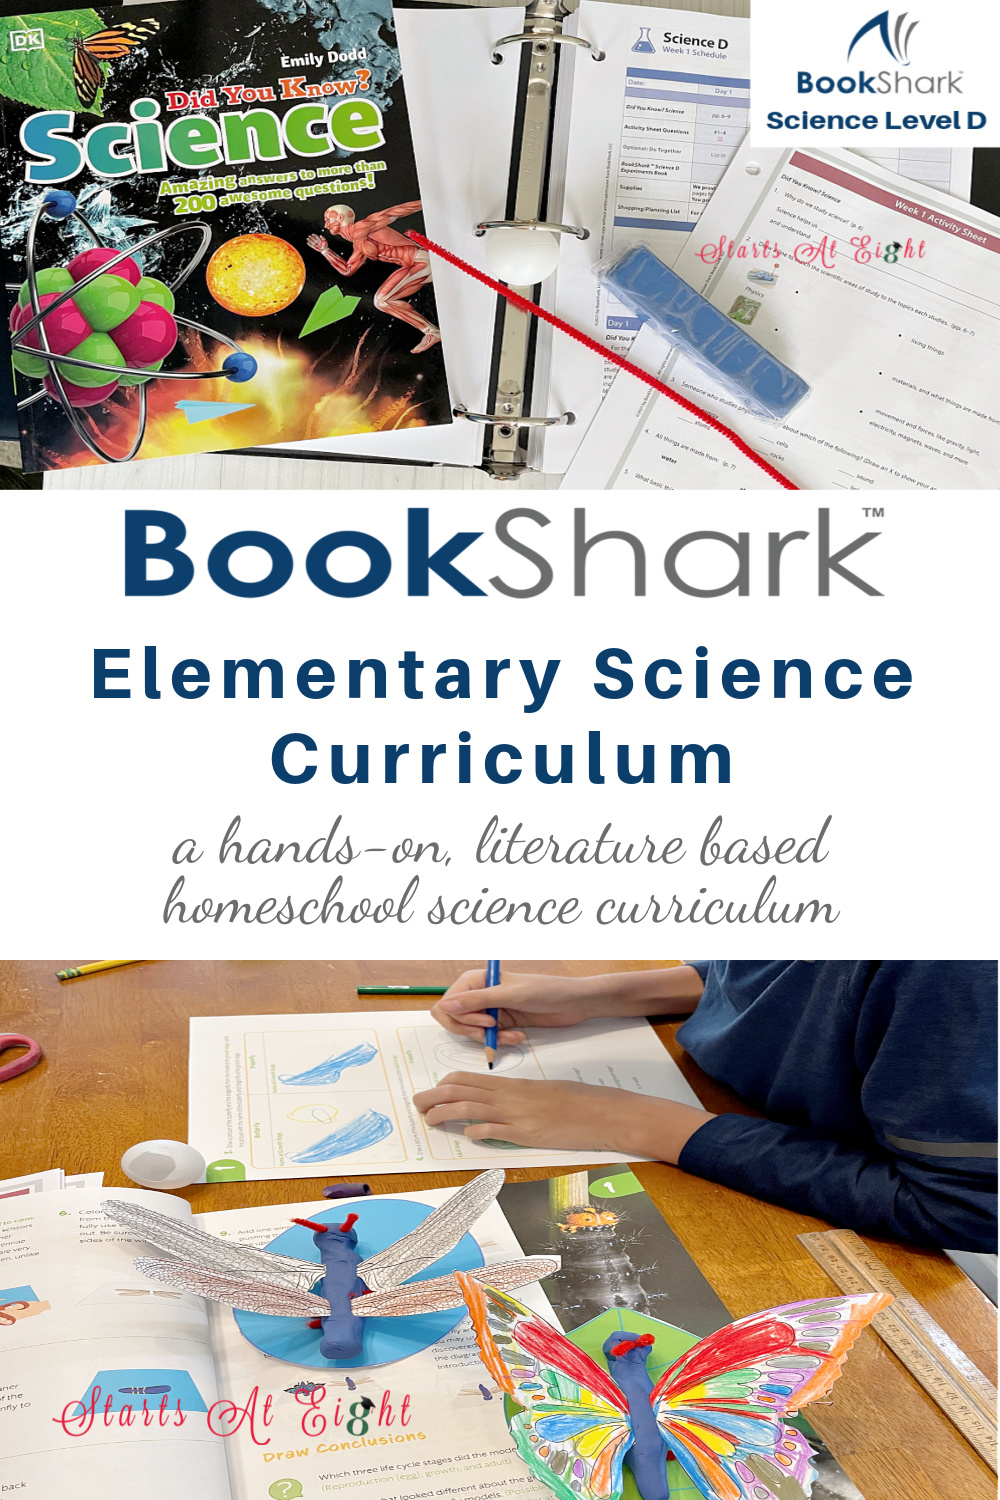 BookShark Elementary Science Curriculum is an open & go, literature based, hands-on, secular science curriculum for homeschoolers.